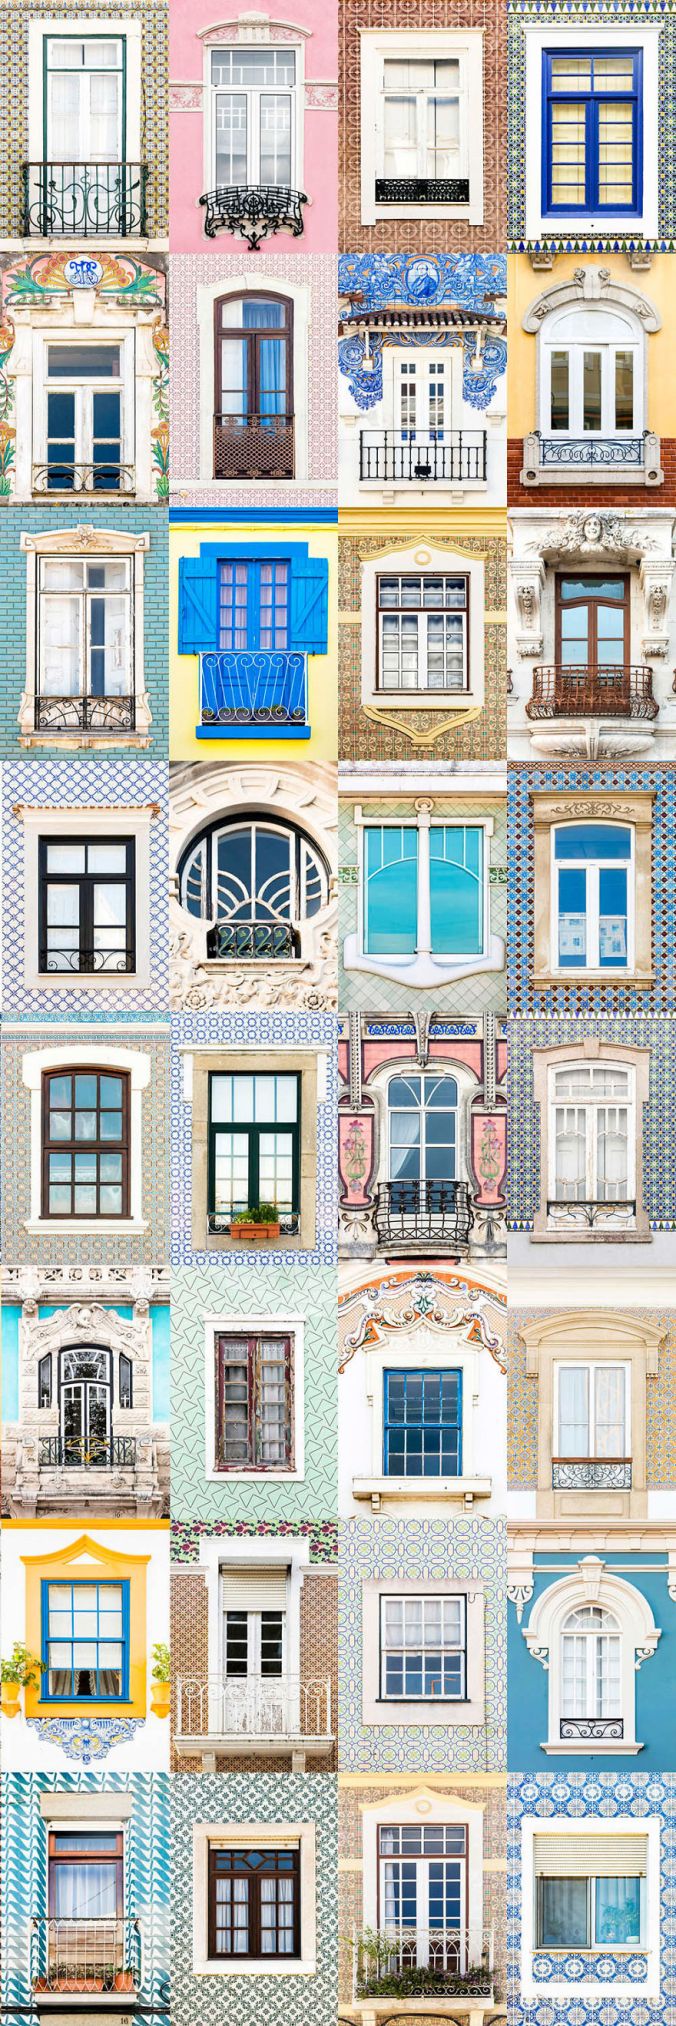 I-traveled-all-over-portugal-to-photograph-windows-more-than-3200-59edaf52b3fc2__880